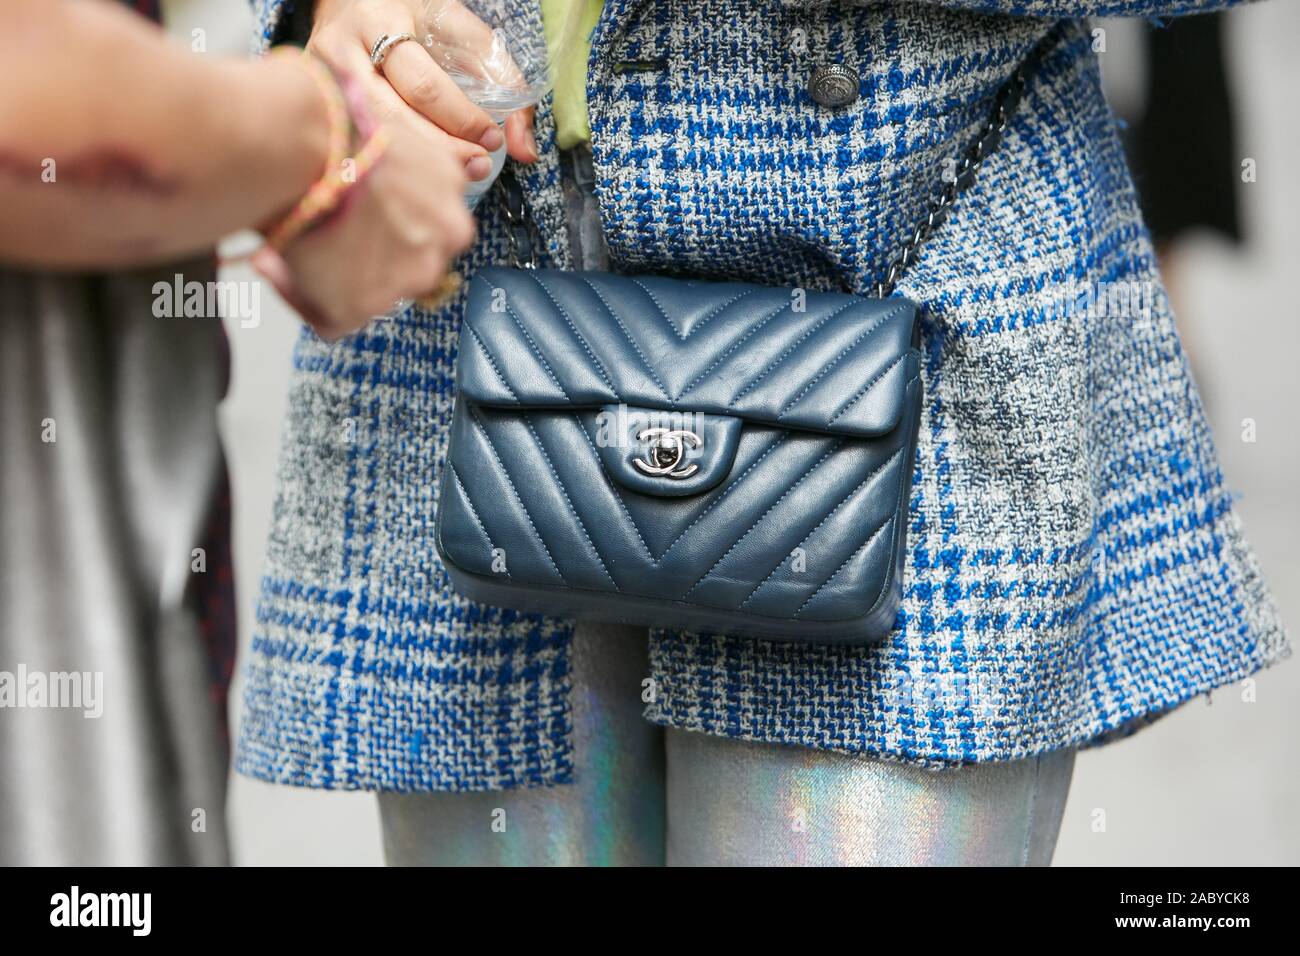 MILAN, ITALY - SEPTEMBER 21, 2018: Woman with blue Chanel leather bag  before Blumarine fashion show, Milan Fashion Week street style Stock Photo  - Alamy